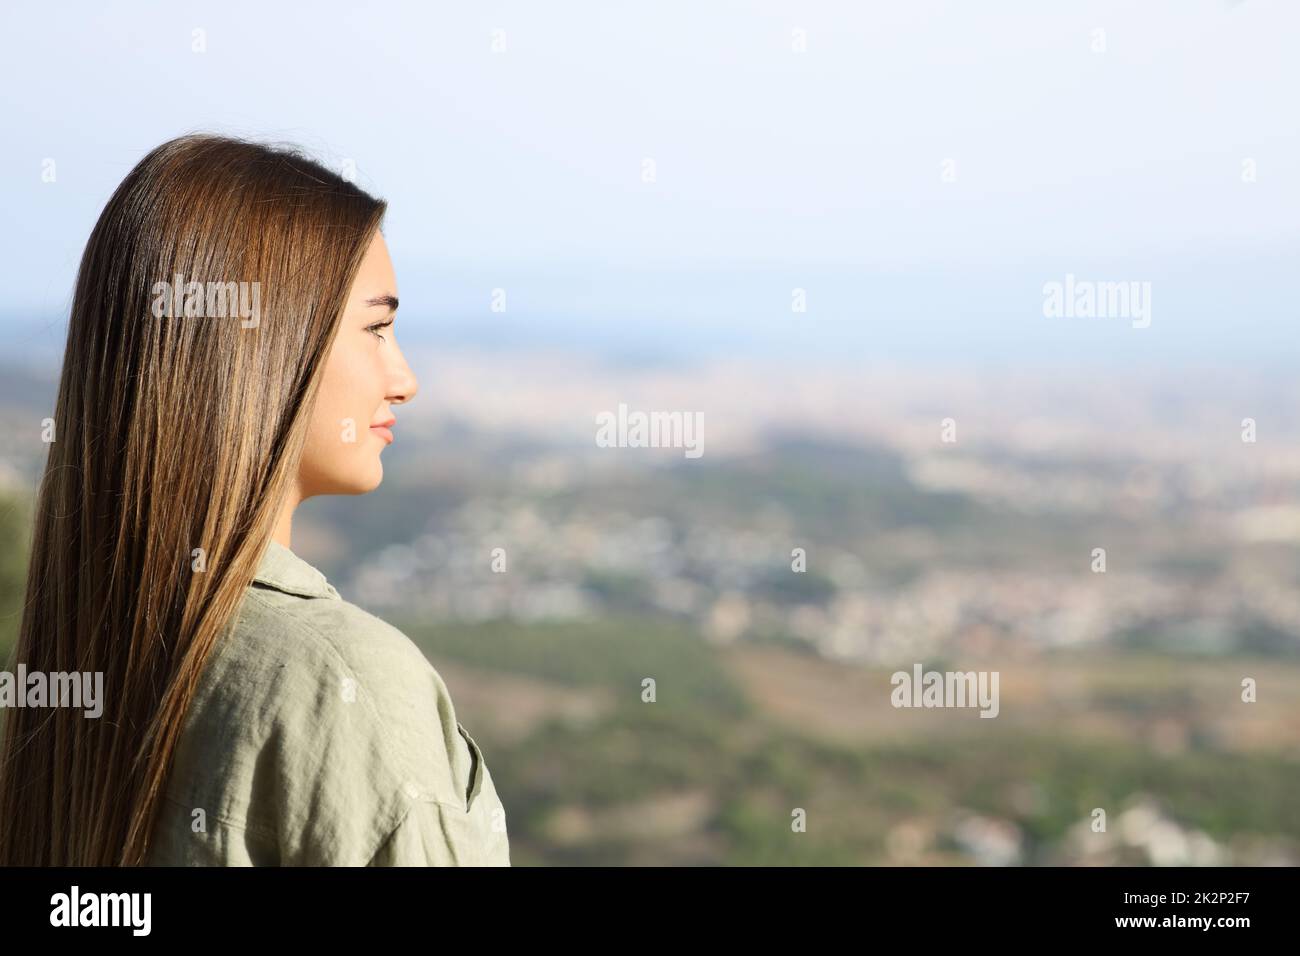 Serious teen contemplating views in city outskirts Stock Photo